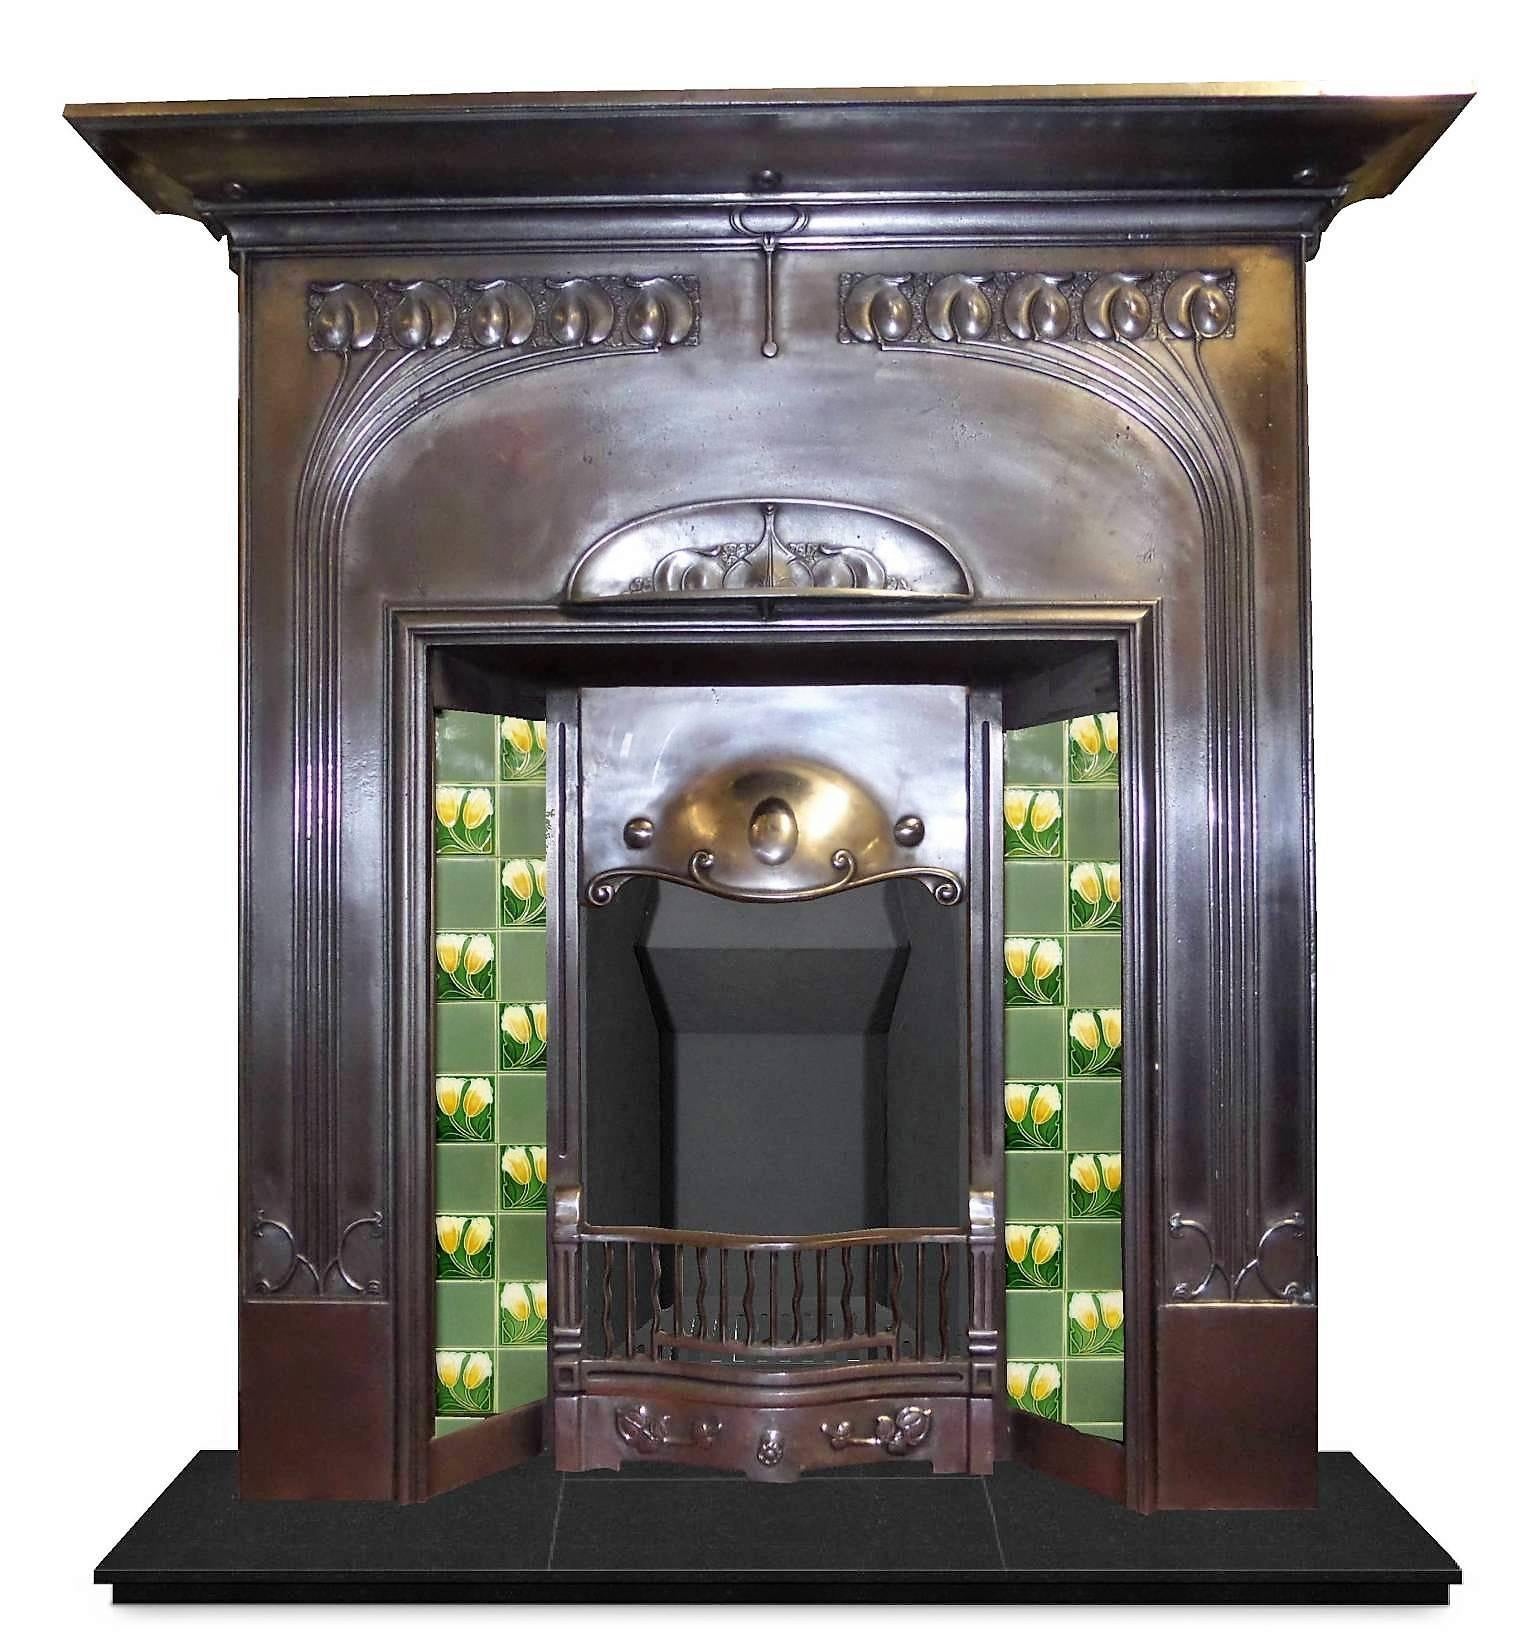 Late 19th Century Victorian Art Nouveau Semi Polished Fireplace with Tiles In Excellent Condition For Sale In Leicester, Leicestershire